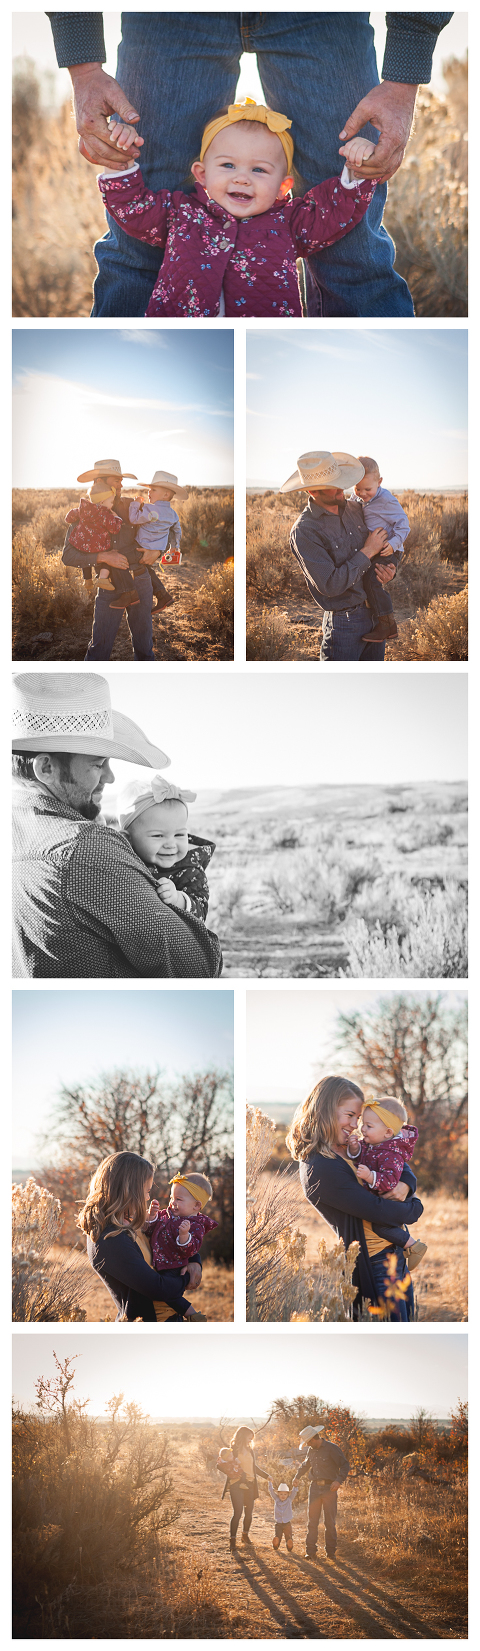 Stolens Lifestyle Family Photography by Hailey Haberman 2018 in Ellensburg WA